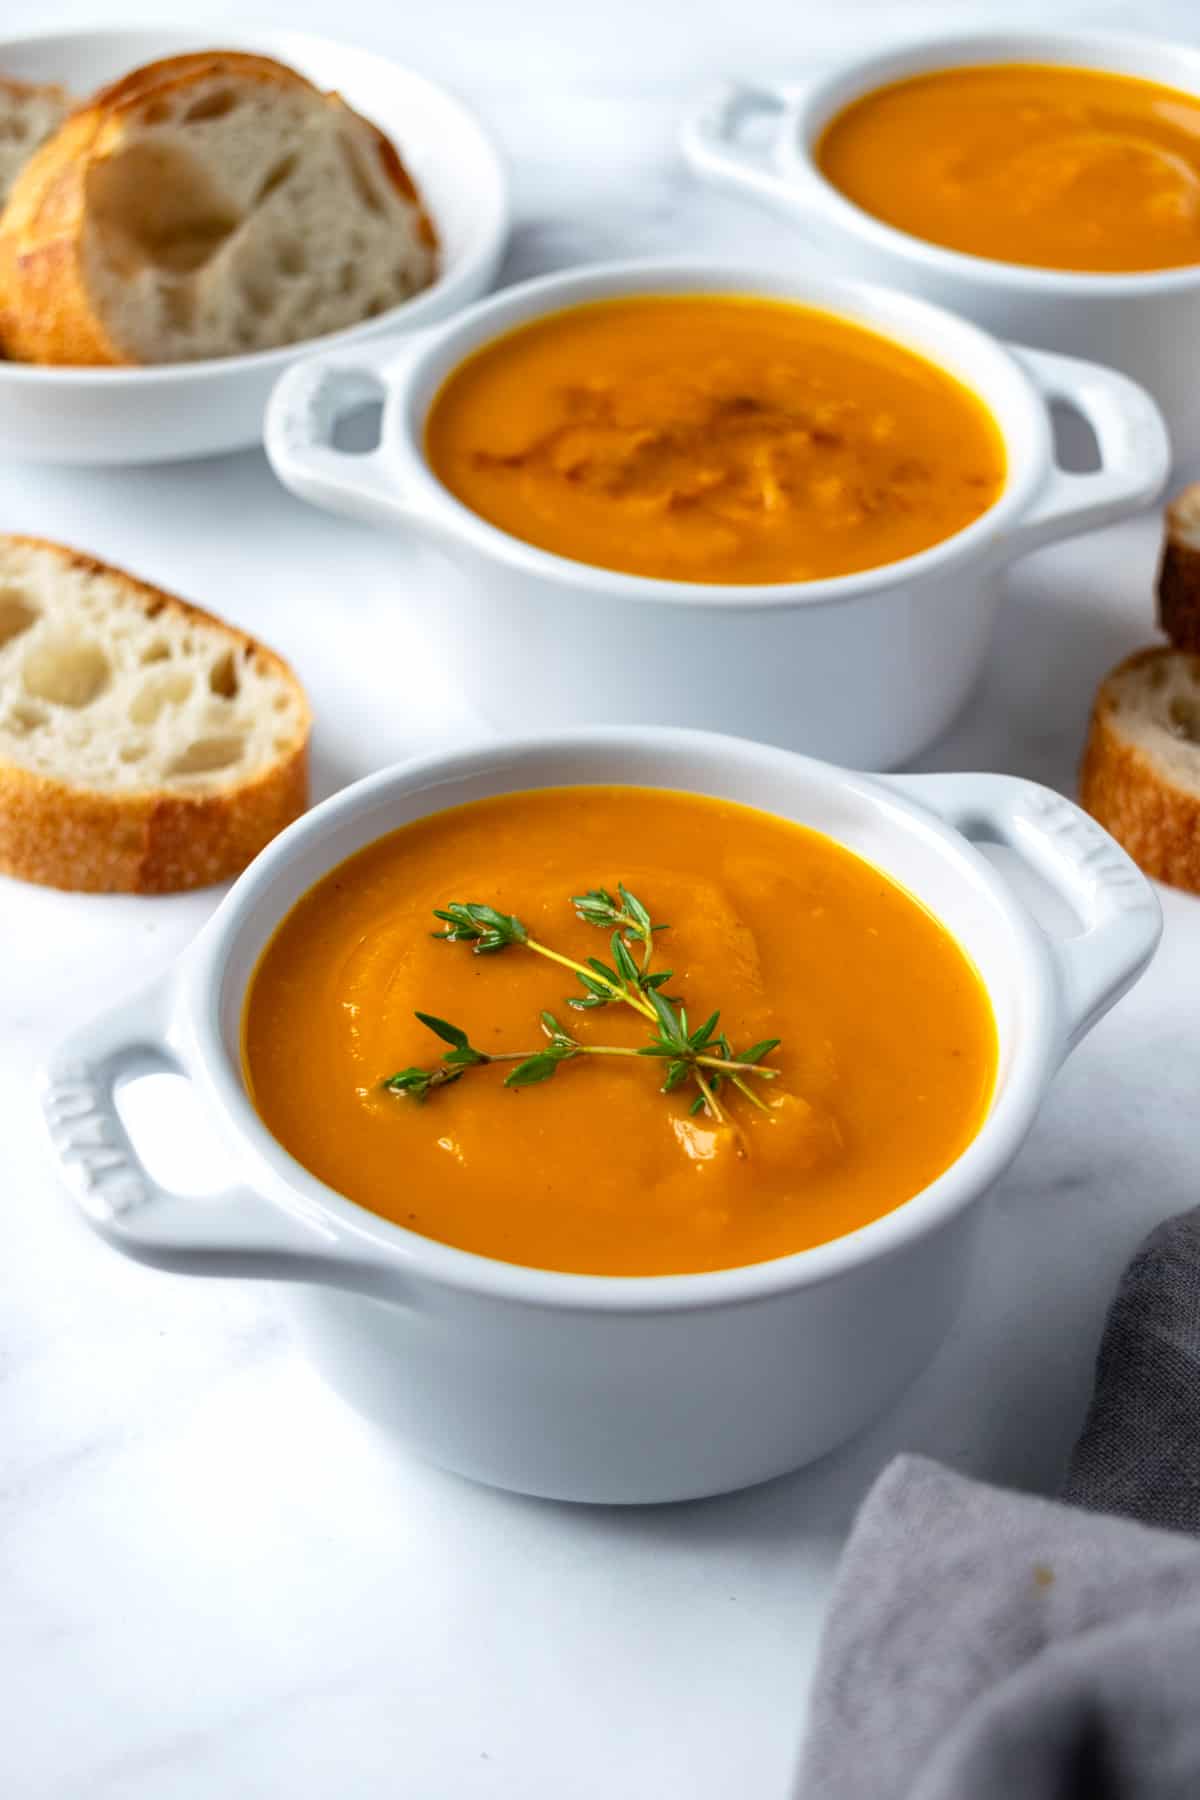 Honeynut Squash Soup in small white bowls.